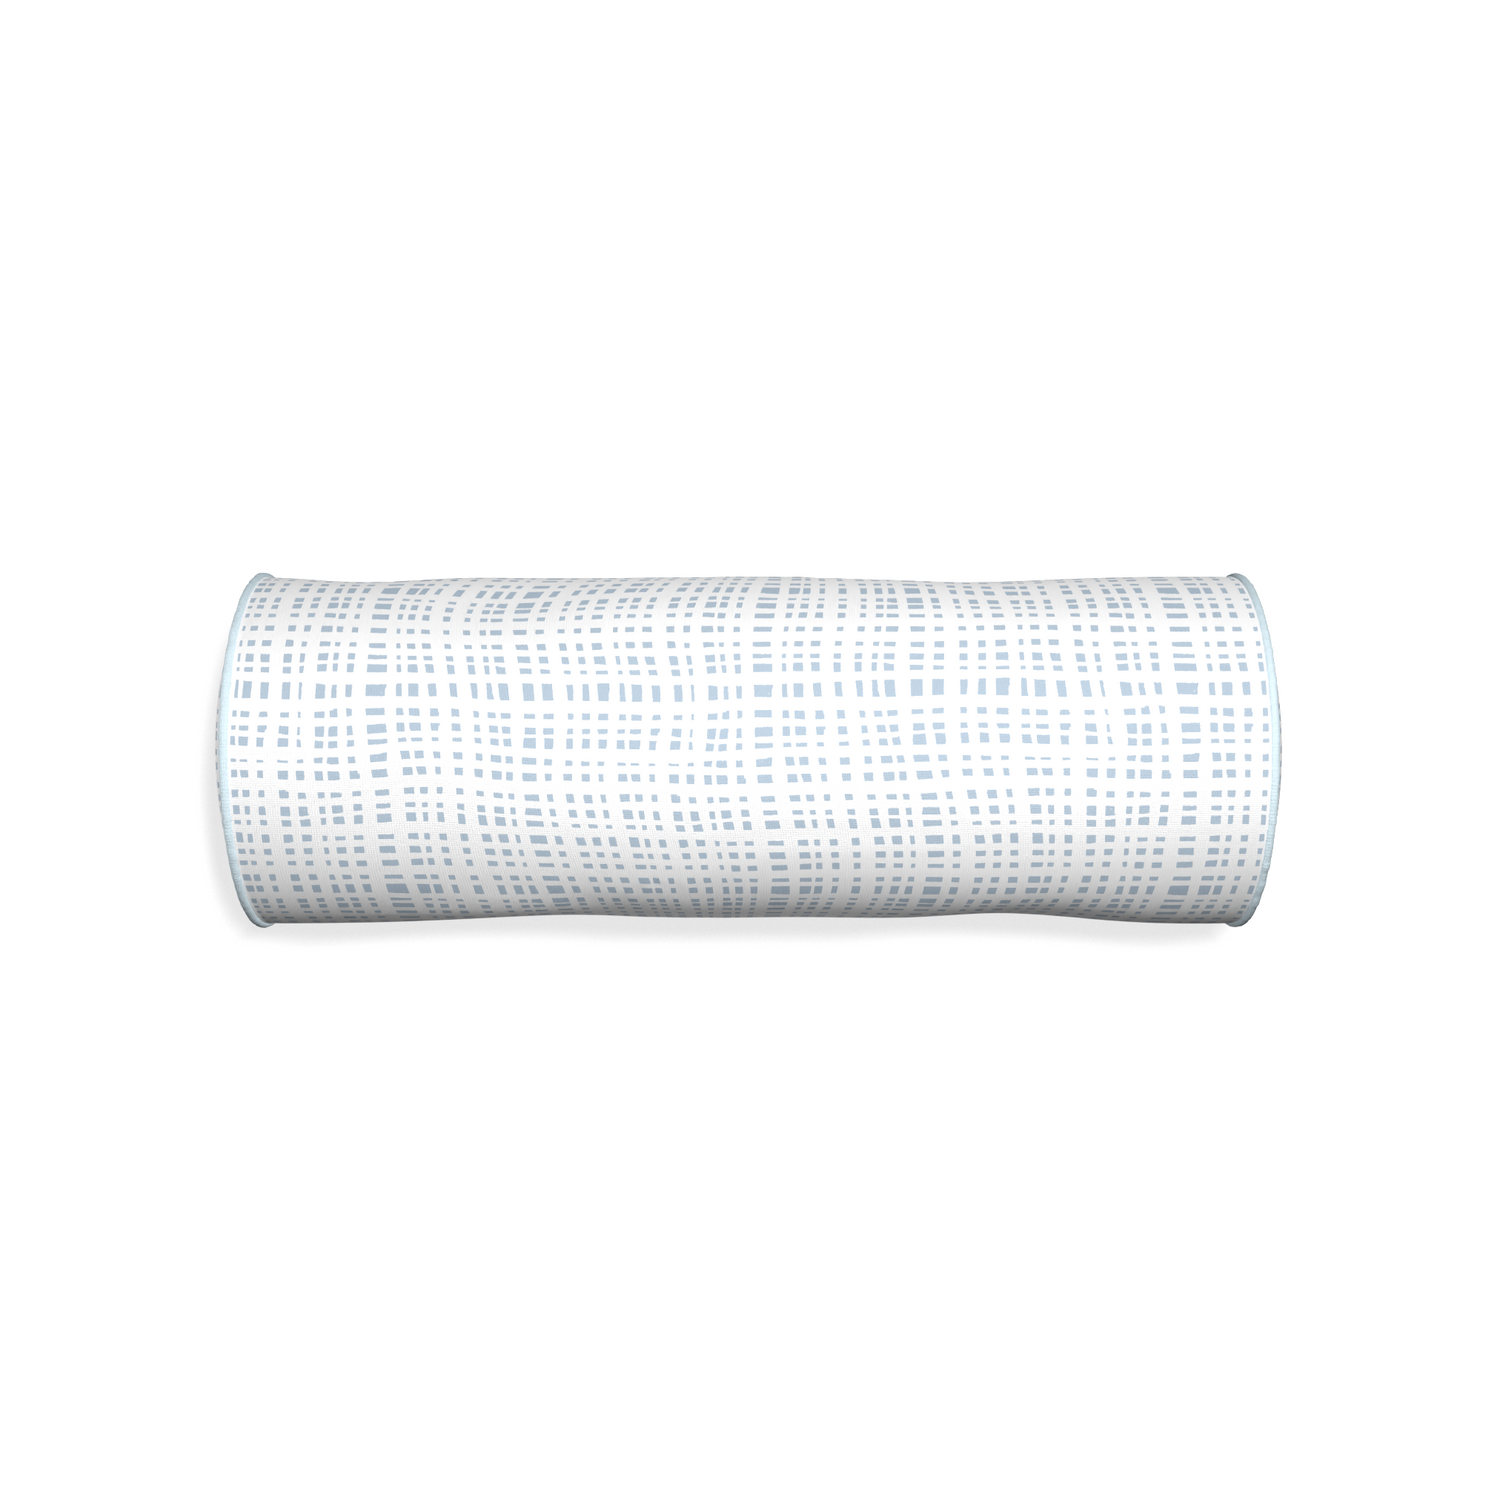 Bolster ginger sky custom plaid sky bluepillow with powder piping on white background